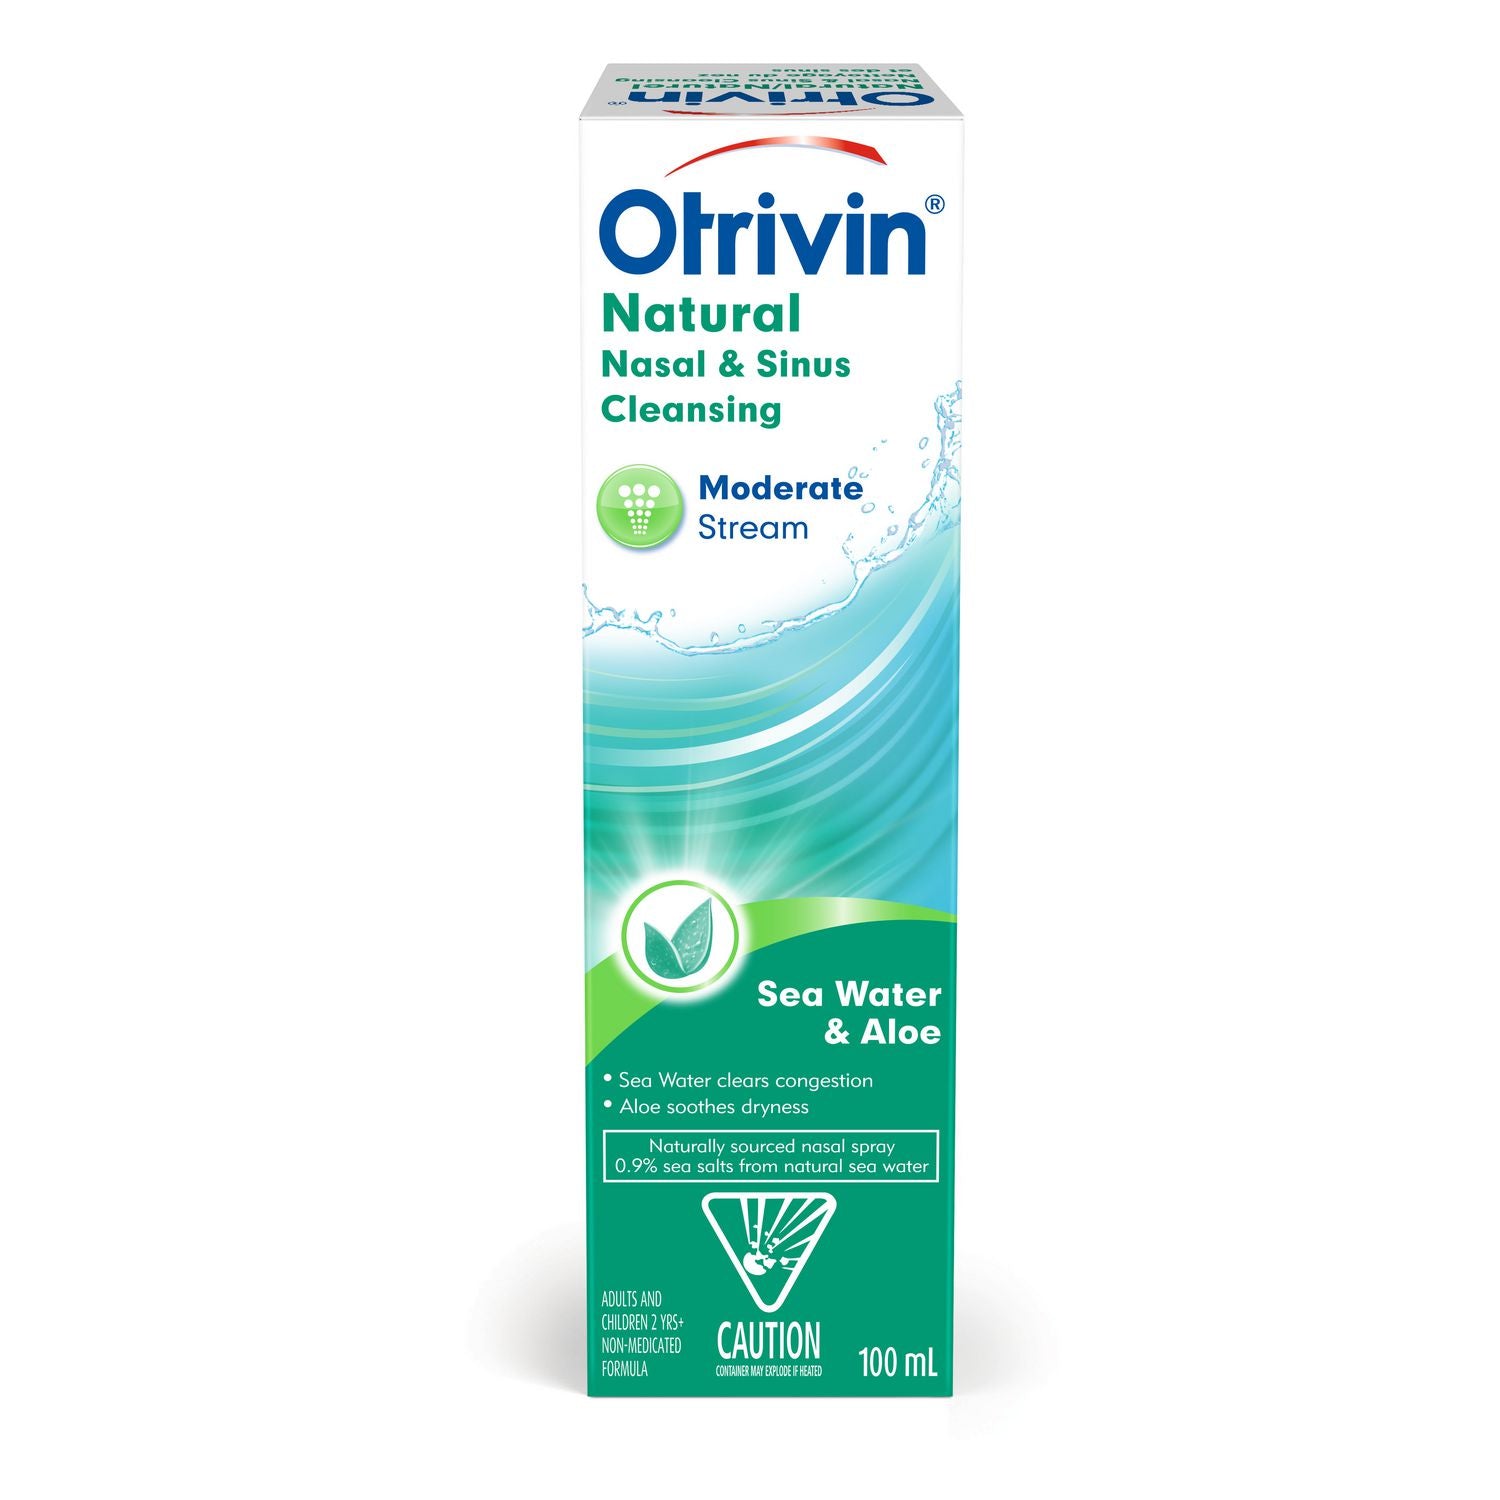 Otrivin Natural Nasal and Sinus Cleansing Moderate Stream 100mL